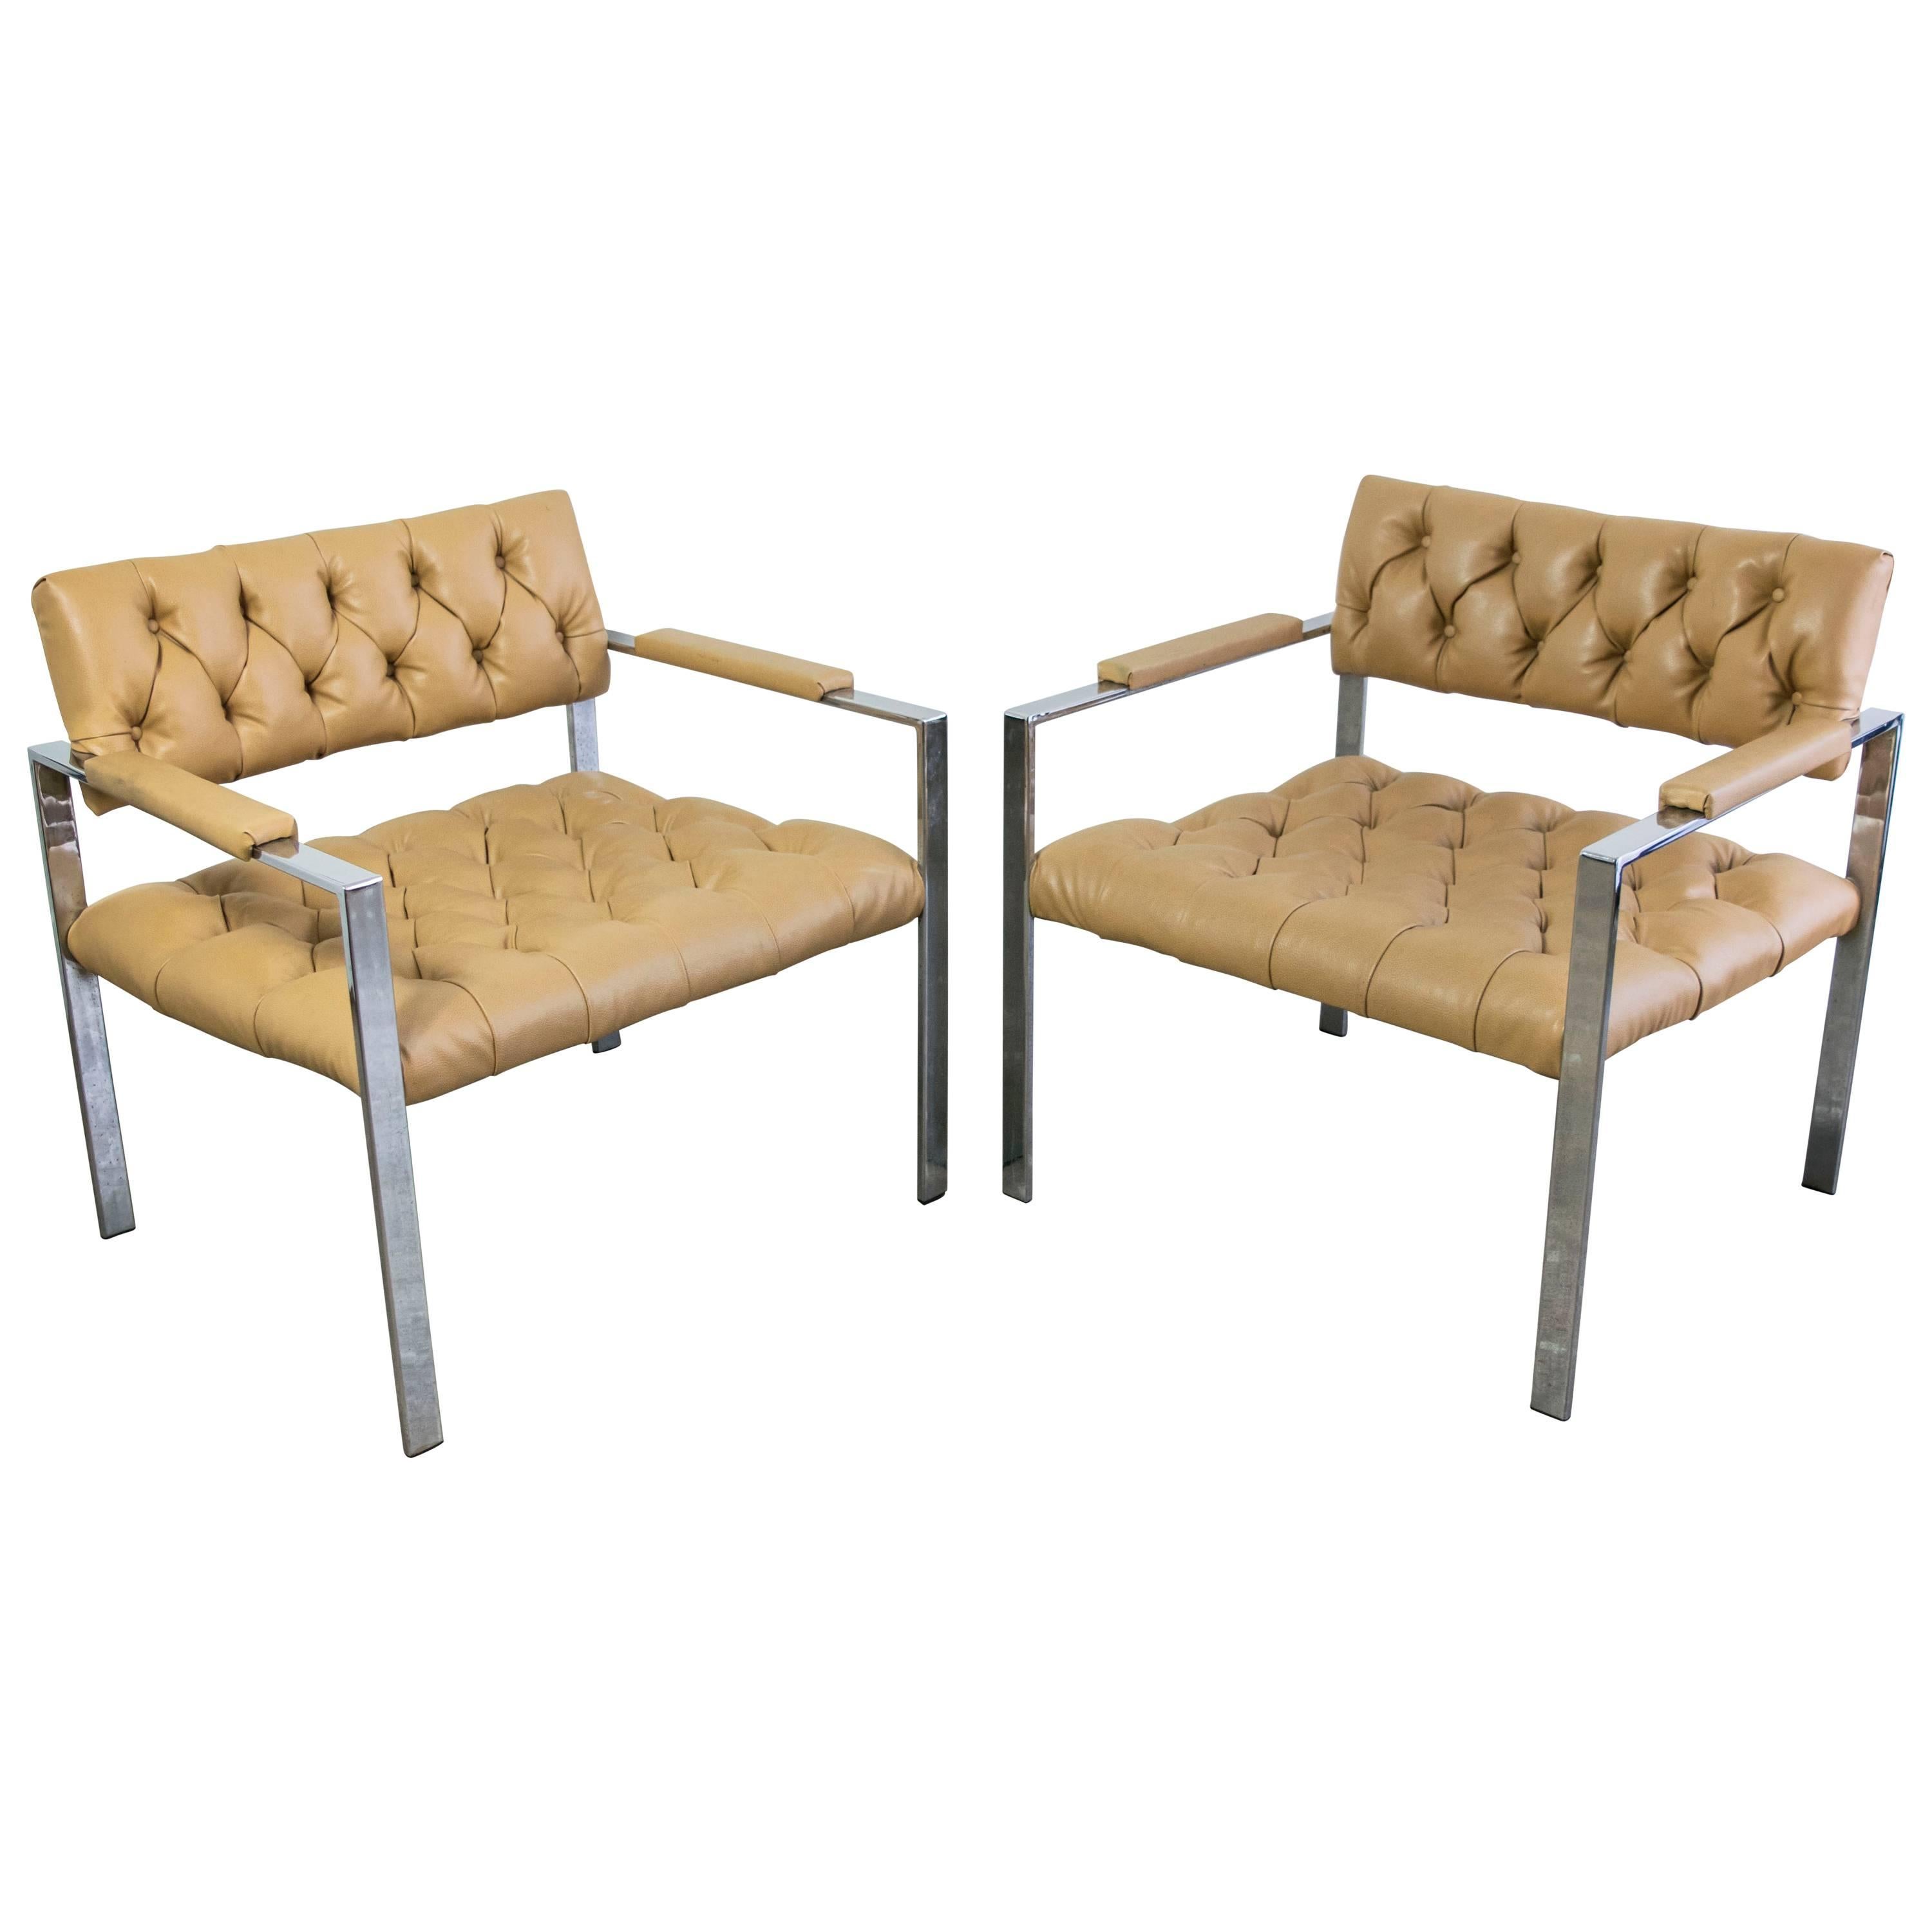 Pair of Tufted Flat Bar Club Chairs in the Style of Harvey Probber For Sale